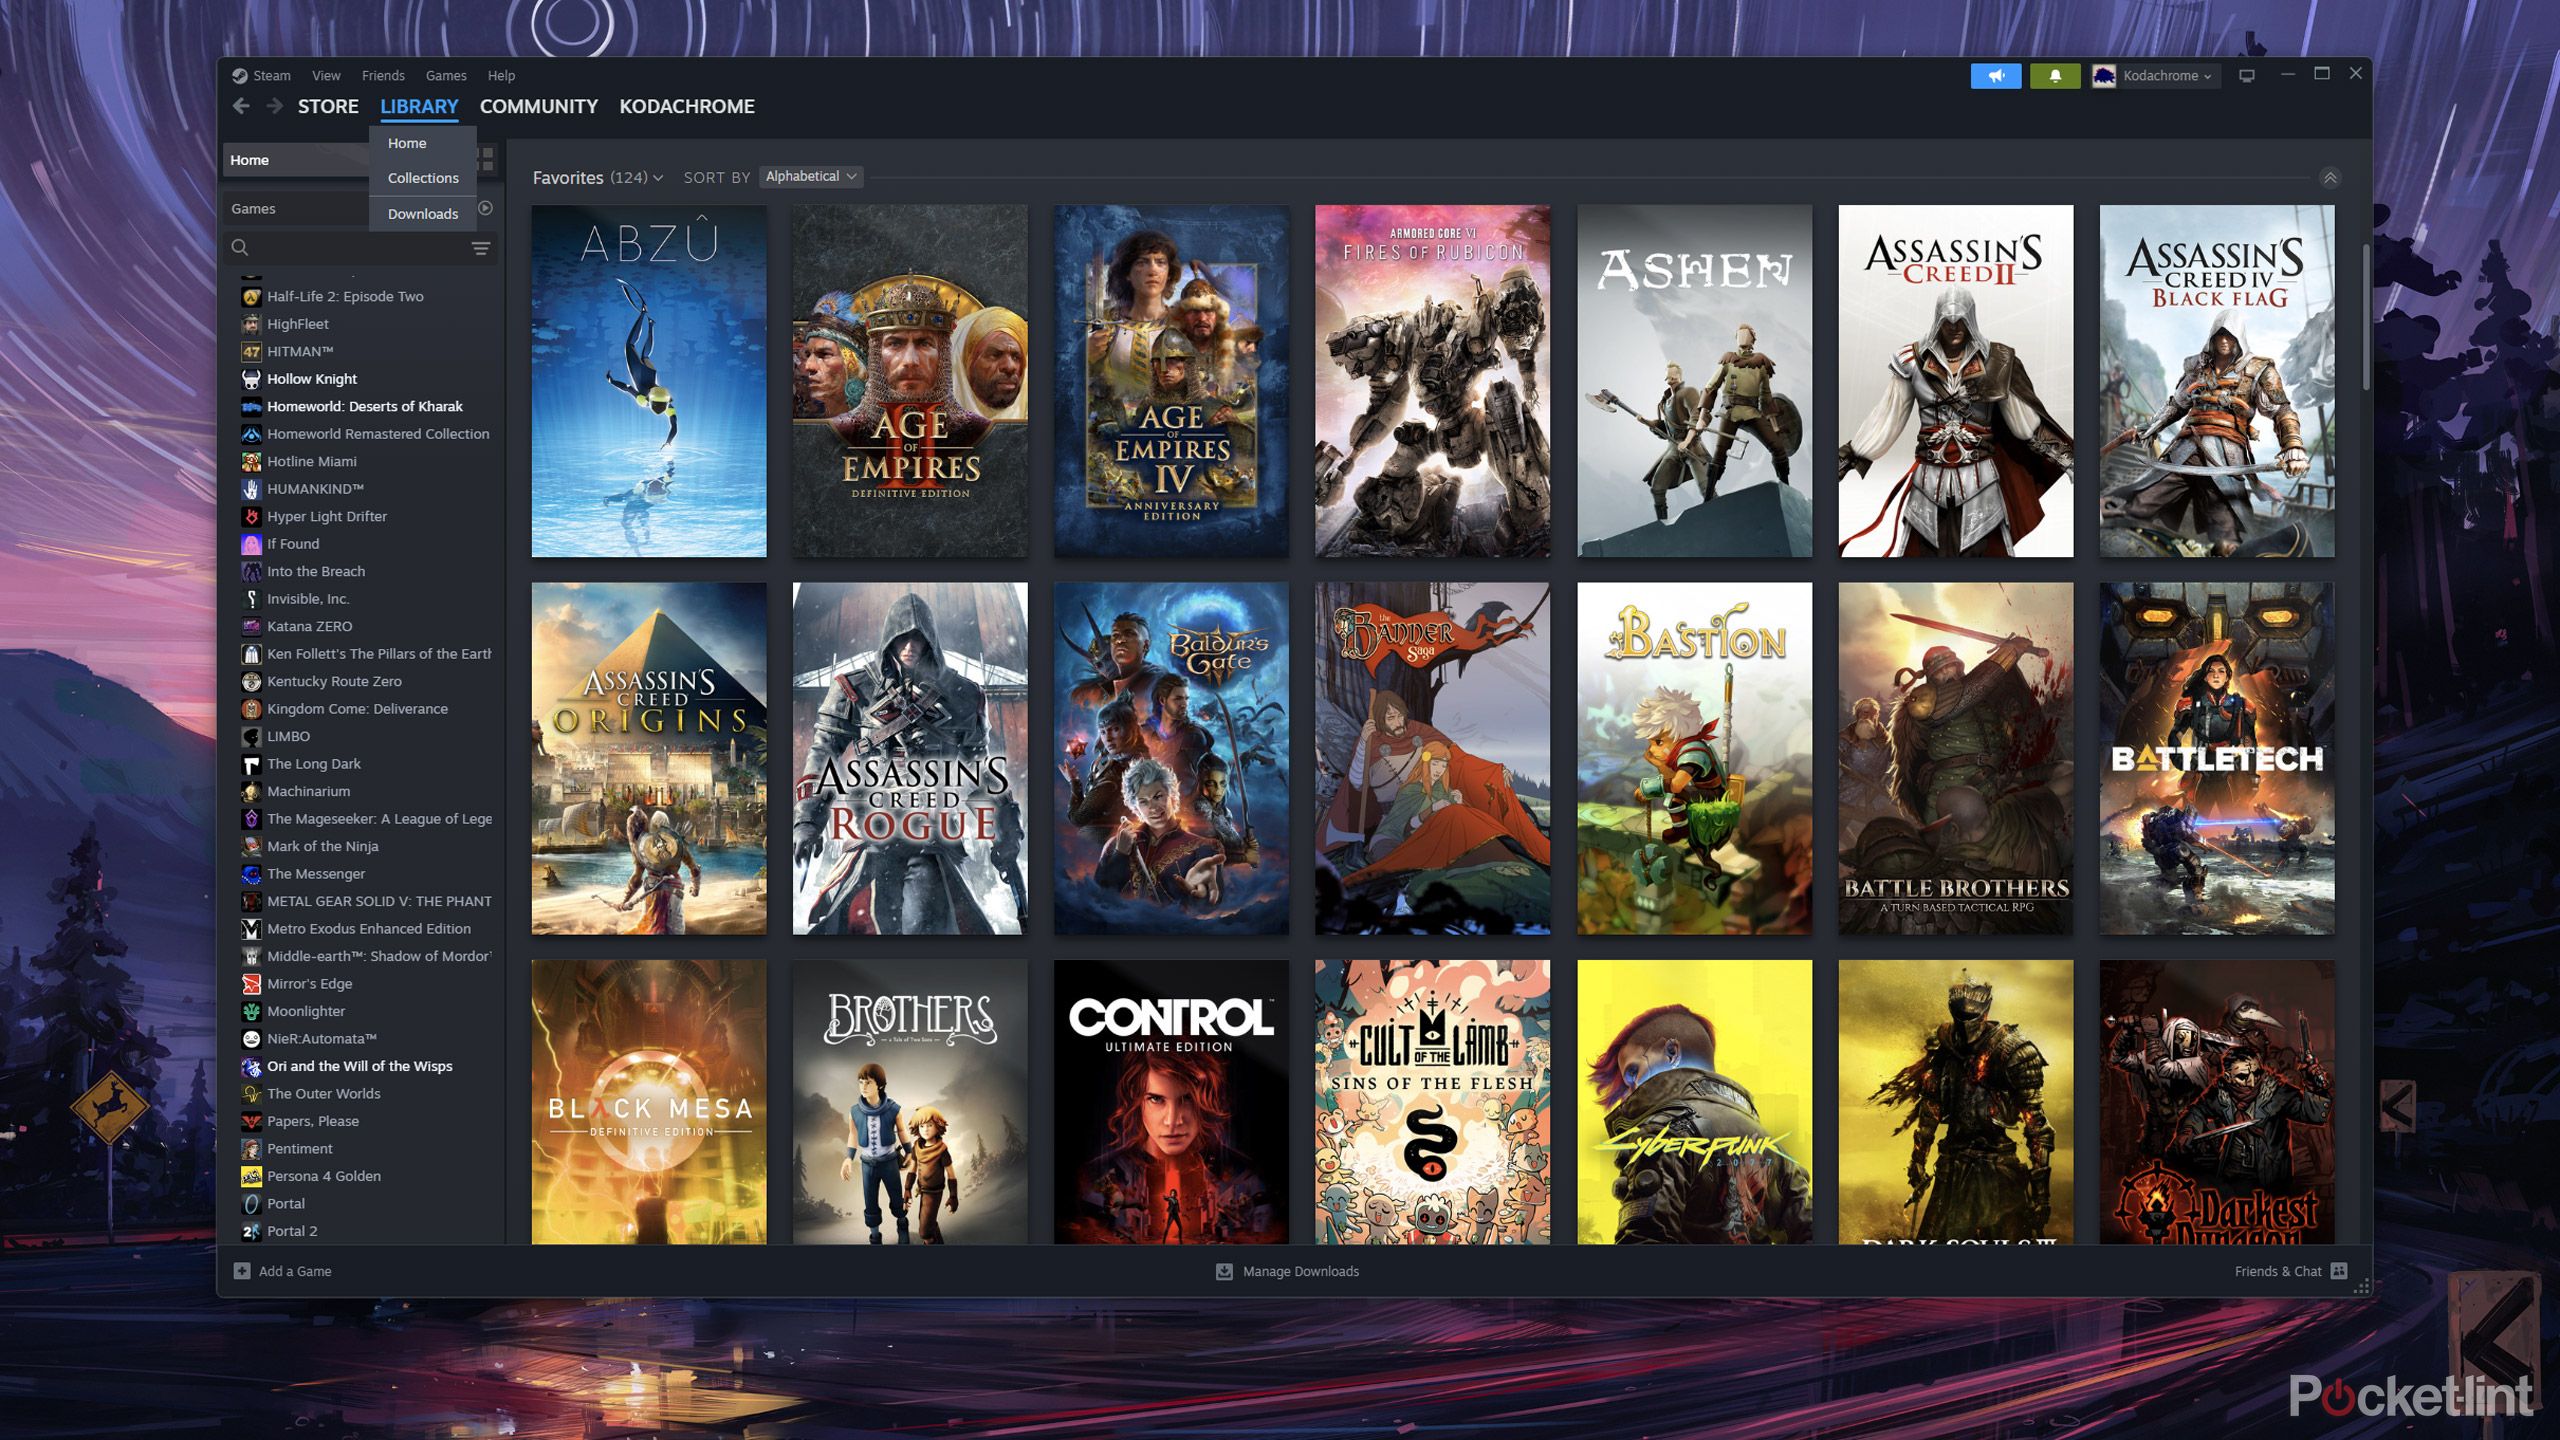 A screenshot of a Steam Library showing titles like Control and Ashen